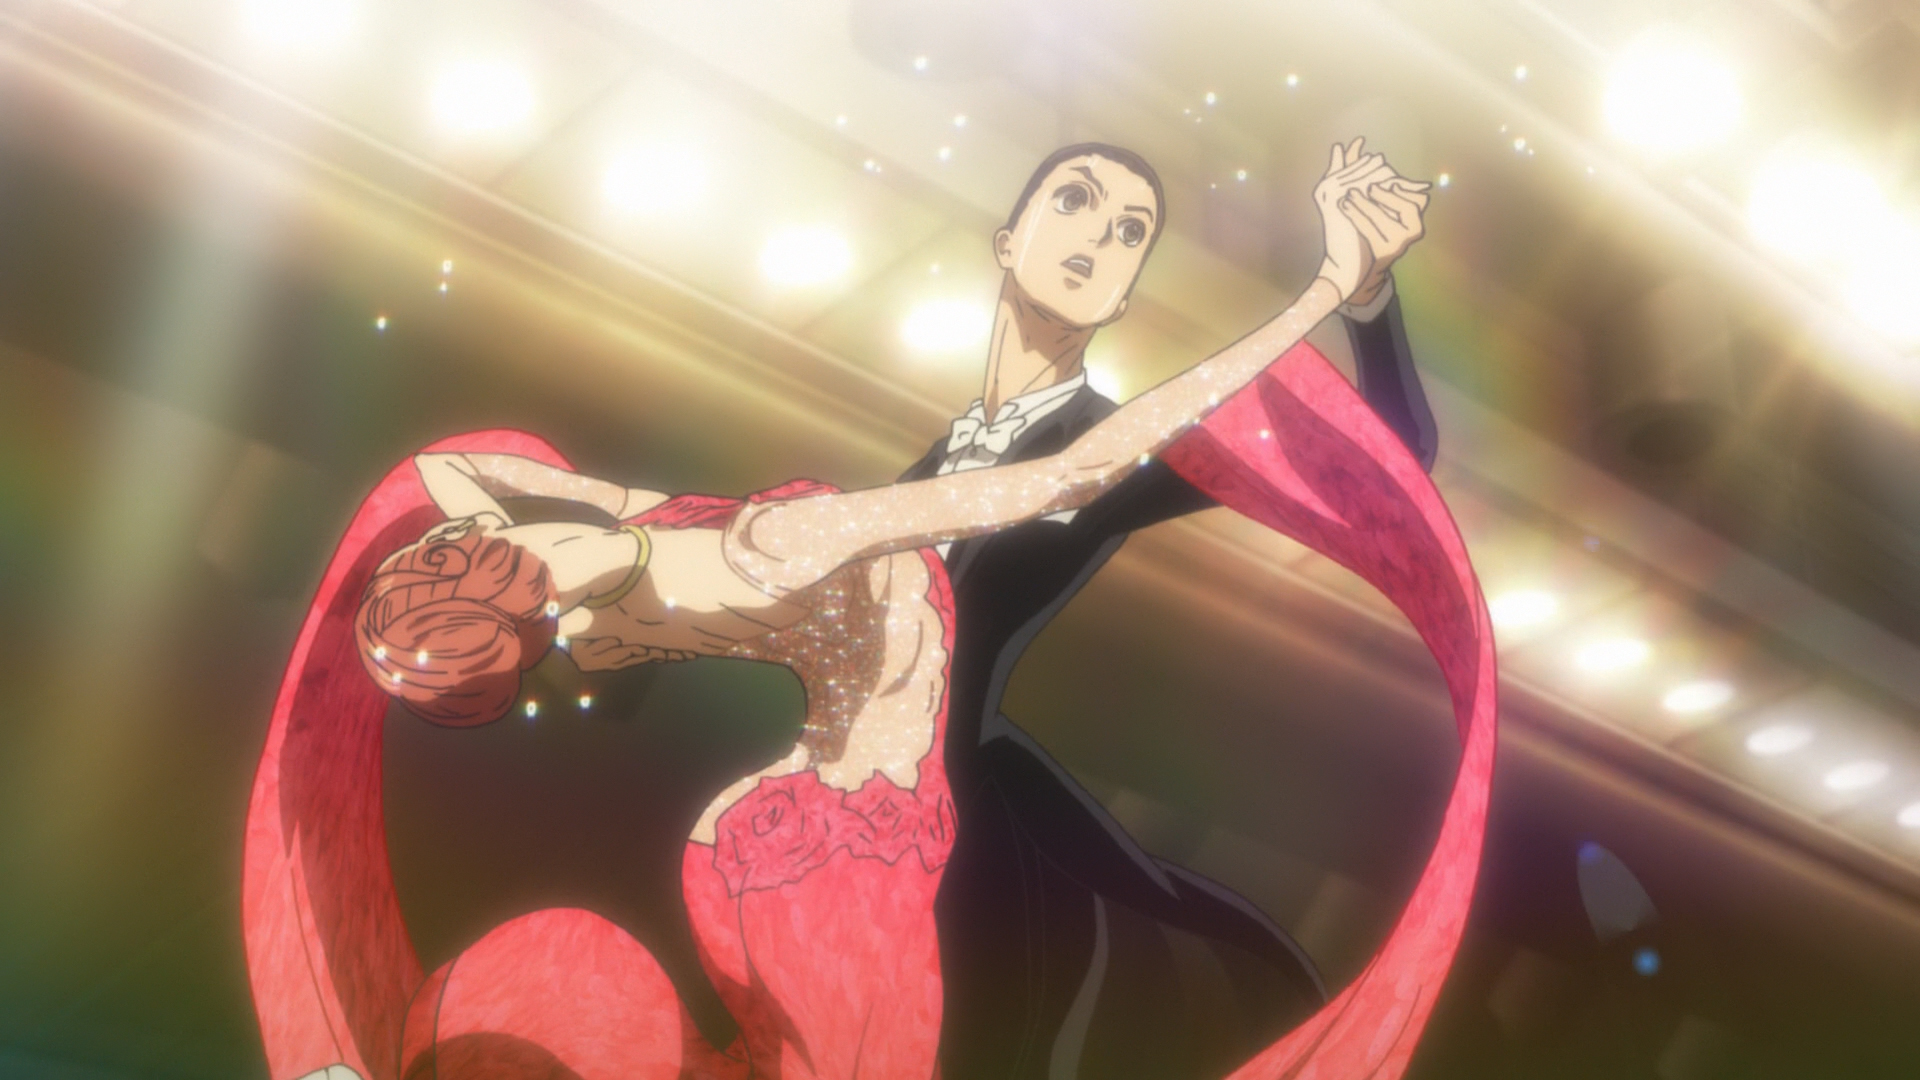 Welcome to the Ballroom Anime Reveals 2nd Key Visual, Dance Character  Designs | Hottest anime characters, Cosplay costumes, Ballroom